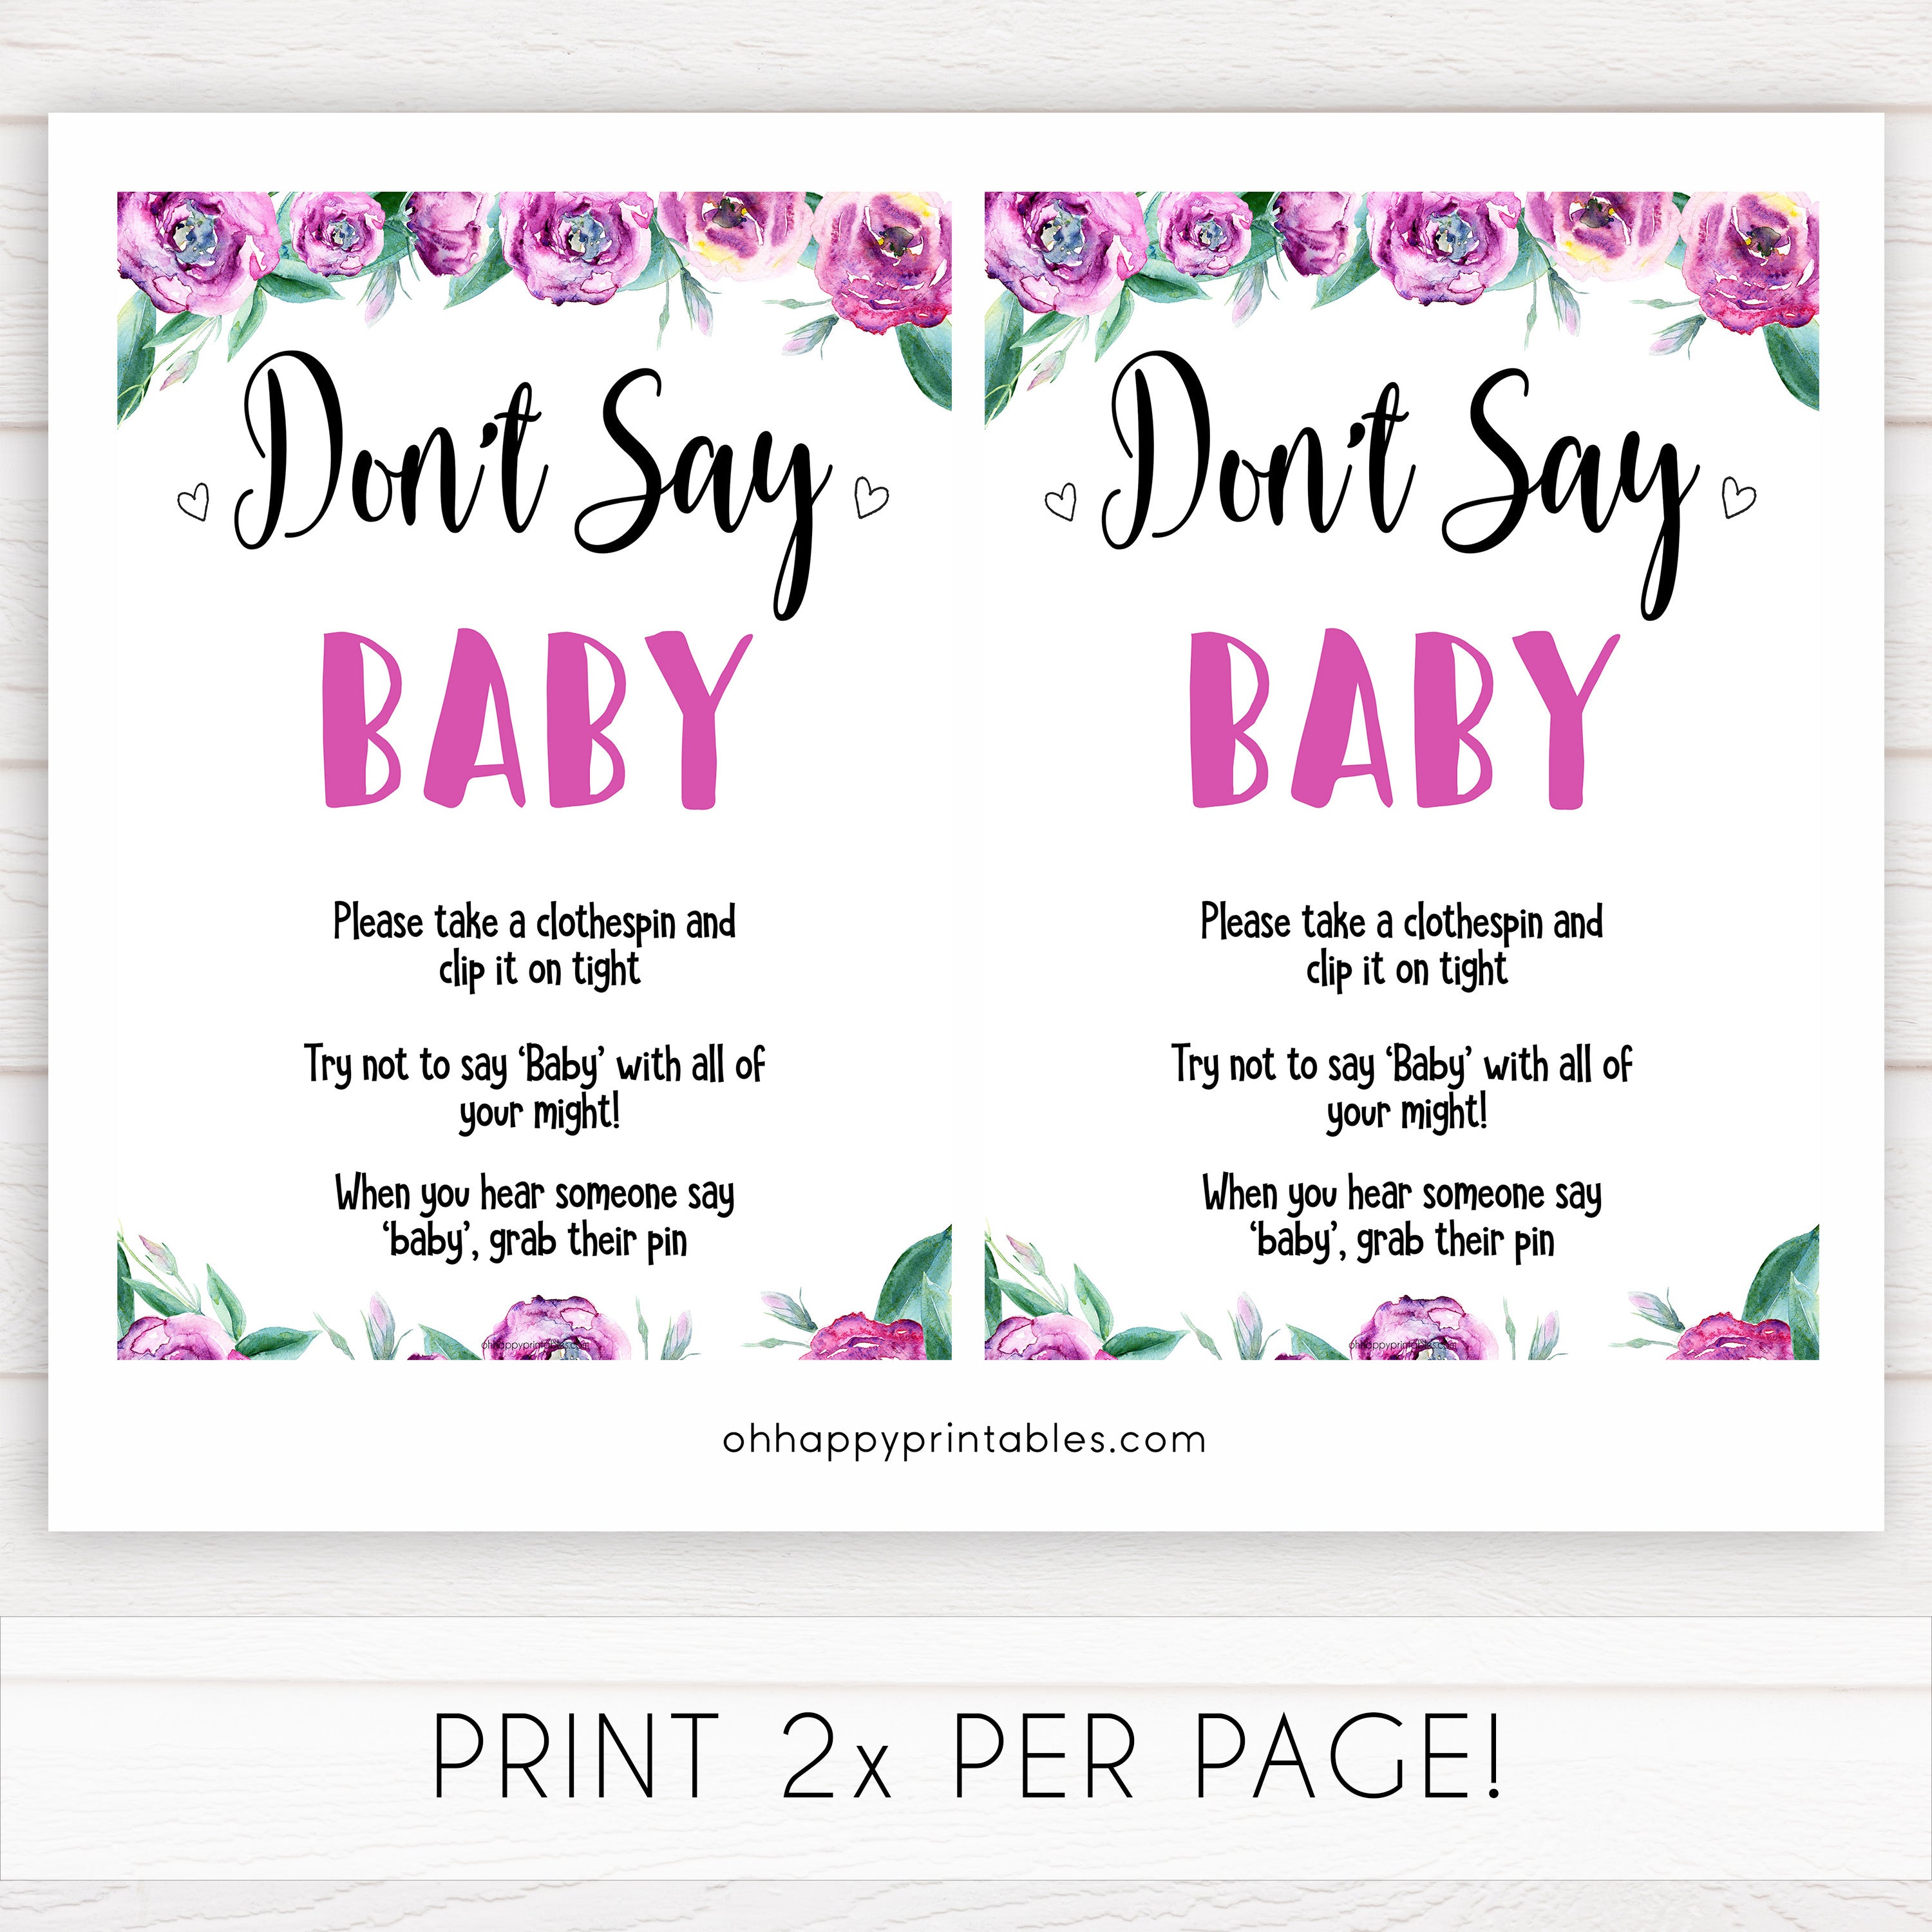 Purple peonies dont say baby baby shower games, printable baby shower games, fun baby shower games, baby shower games, popular baby shower games, floral baby shower games, purple baby shower themes